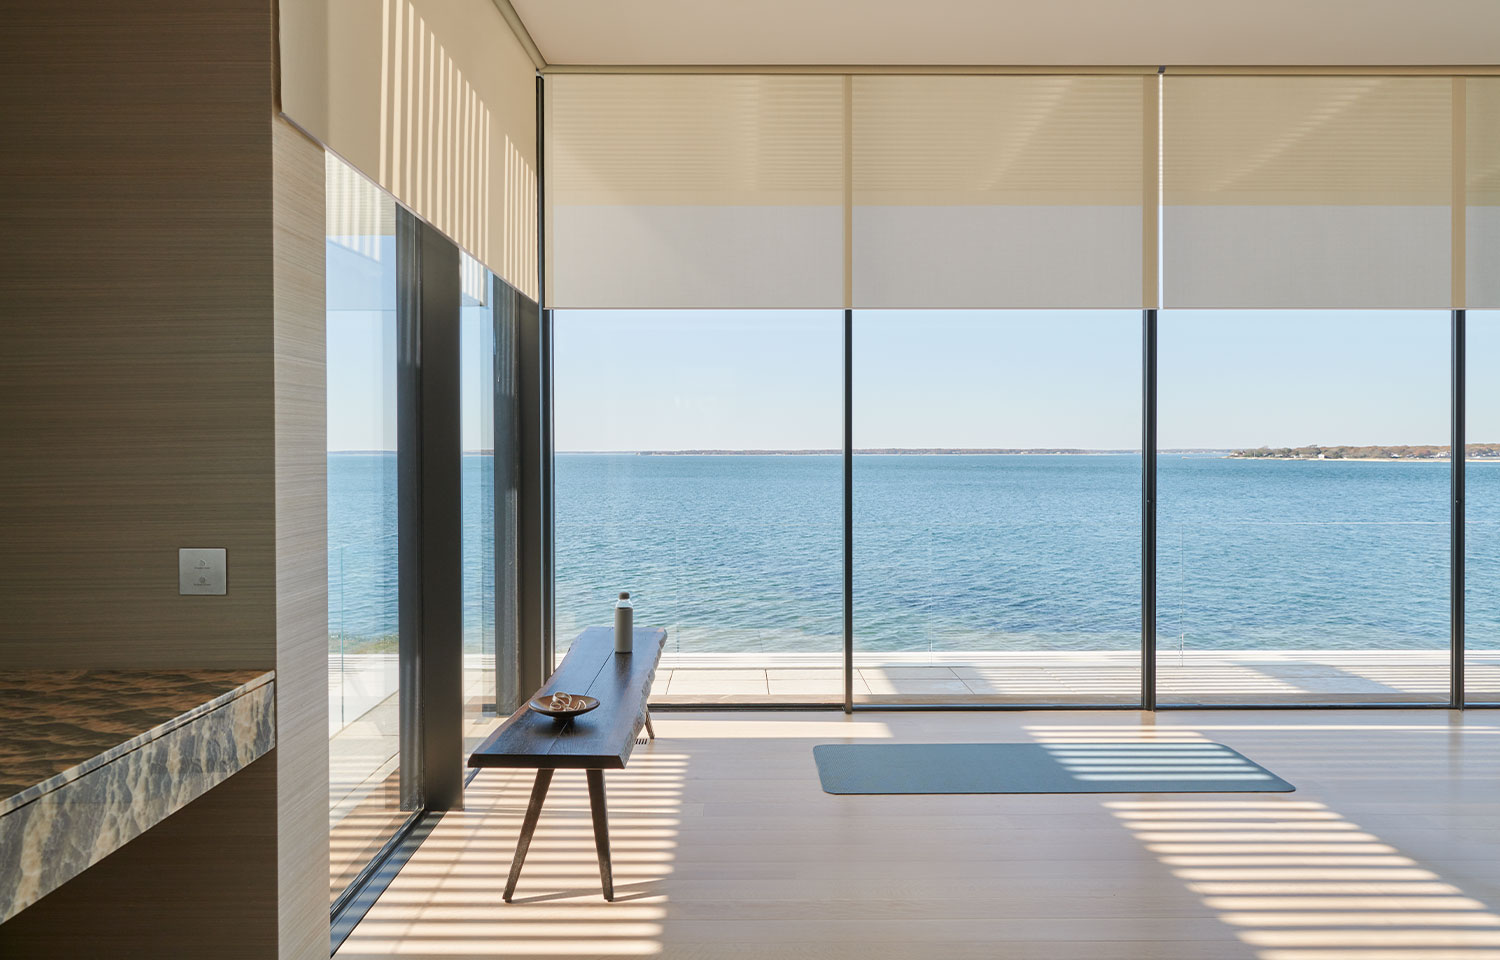 A residential studio with automated shades powered by a HomeWorks Control System